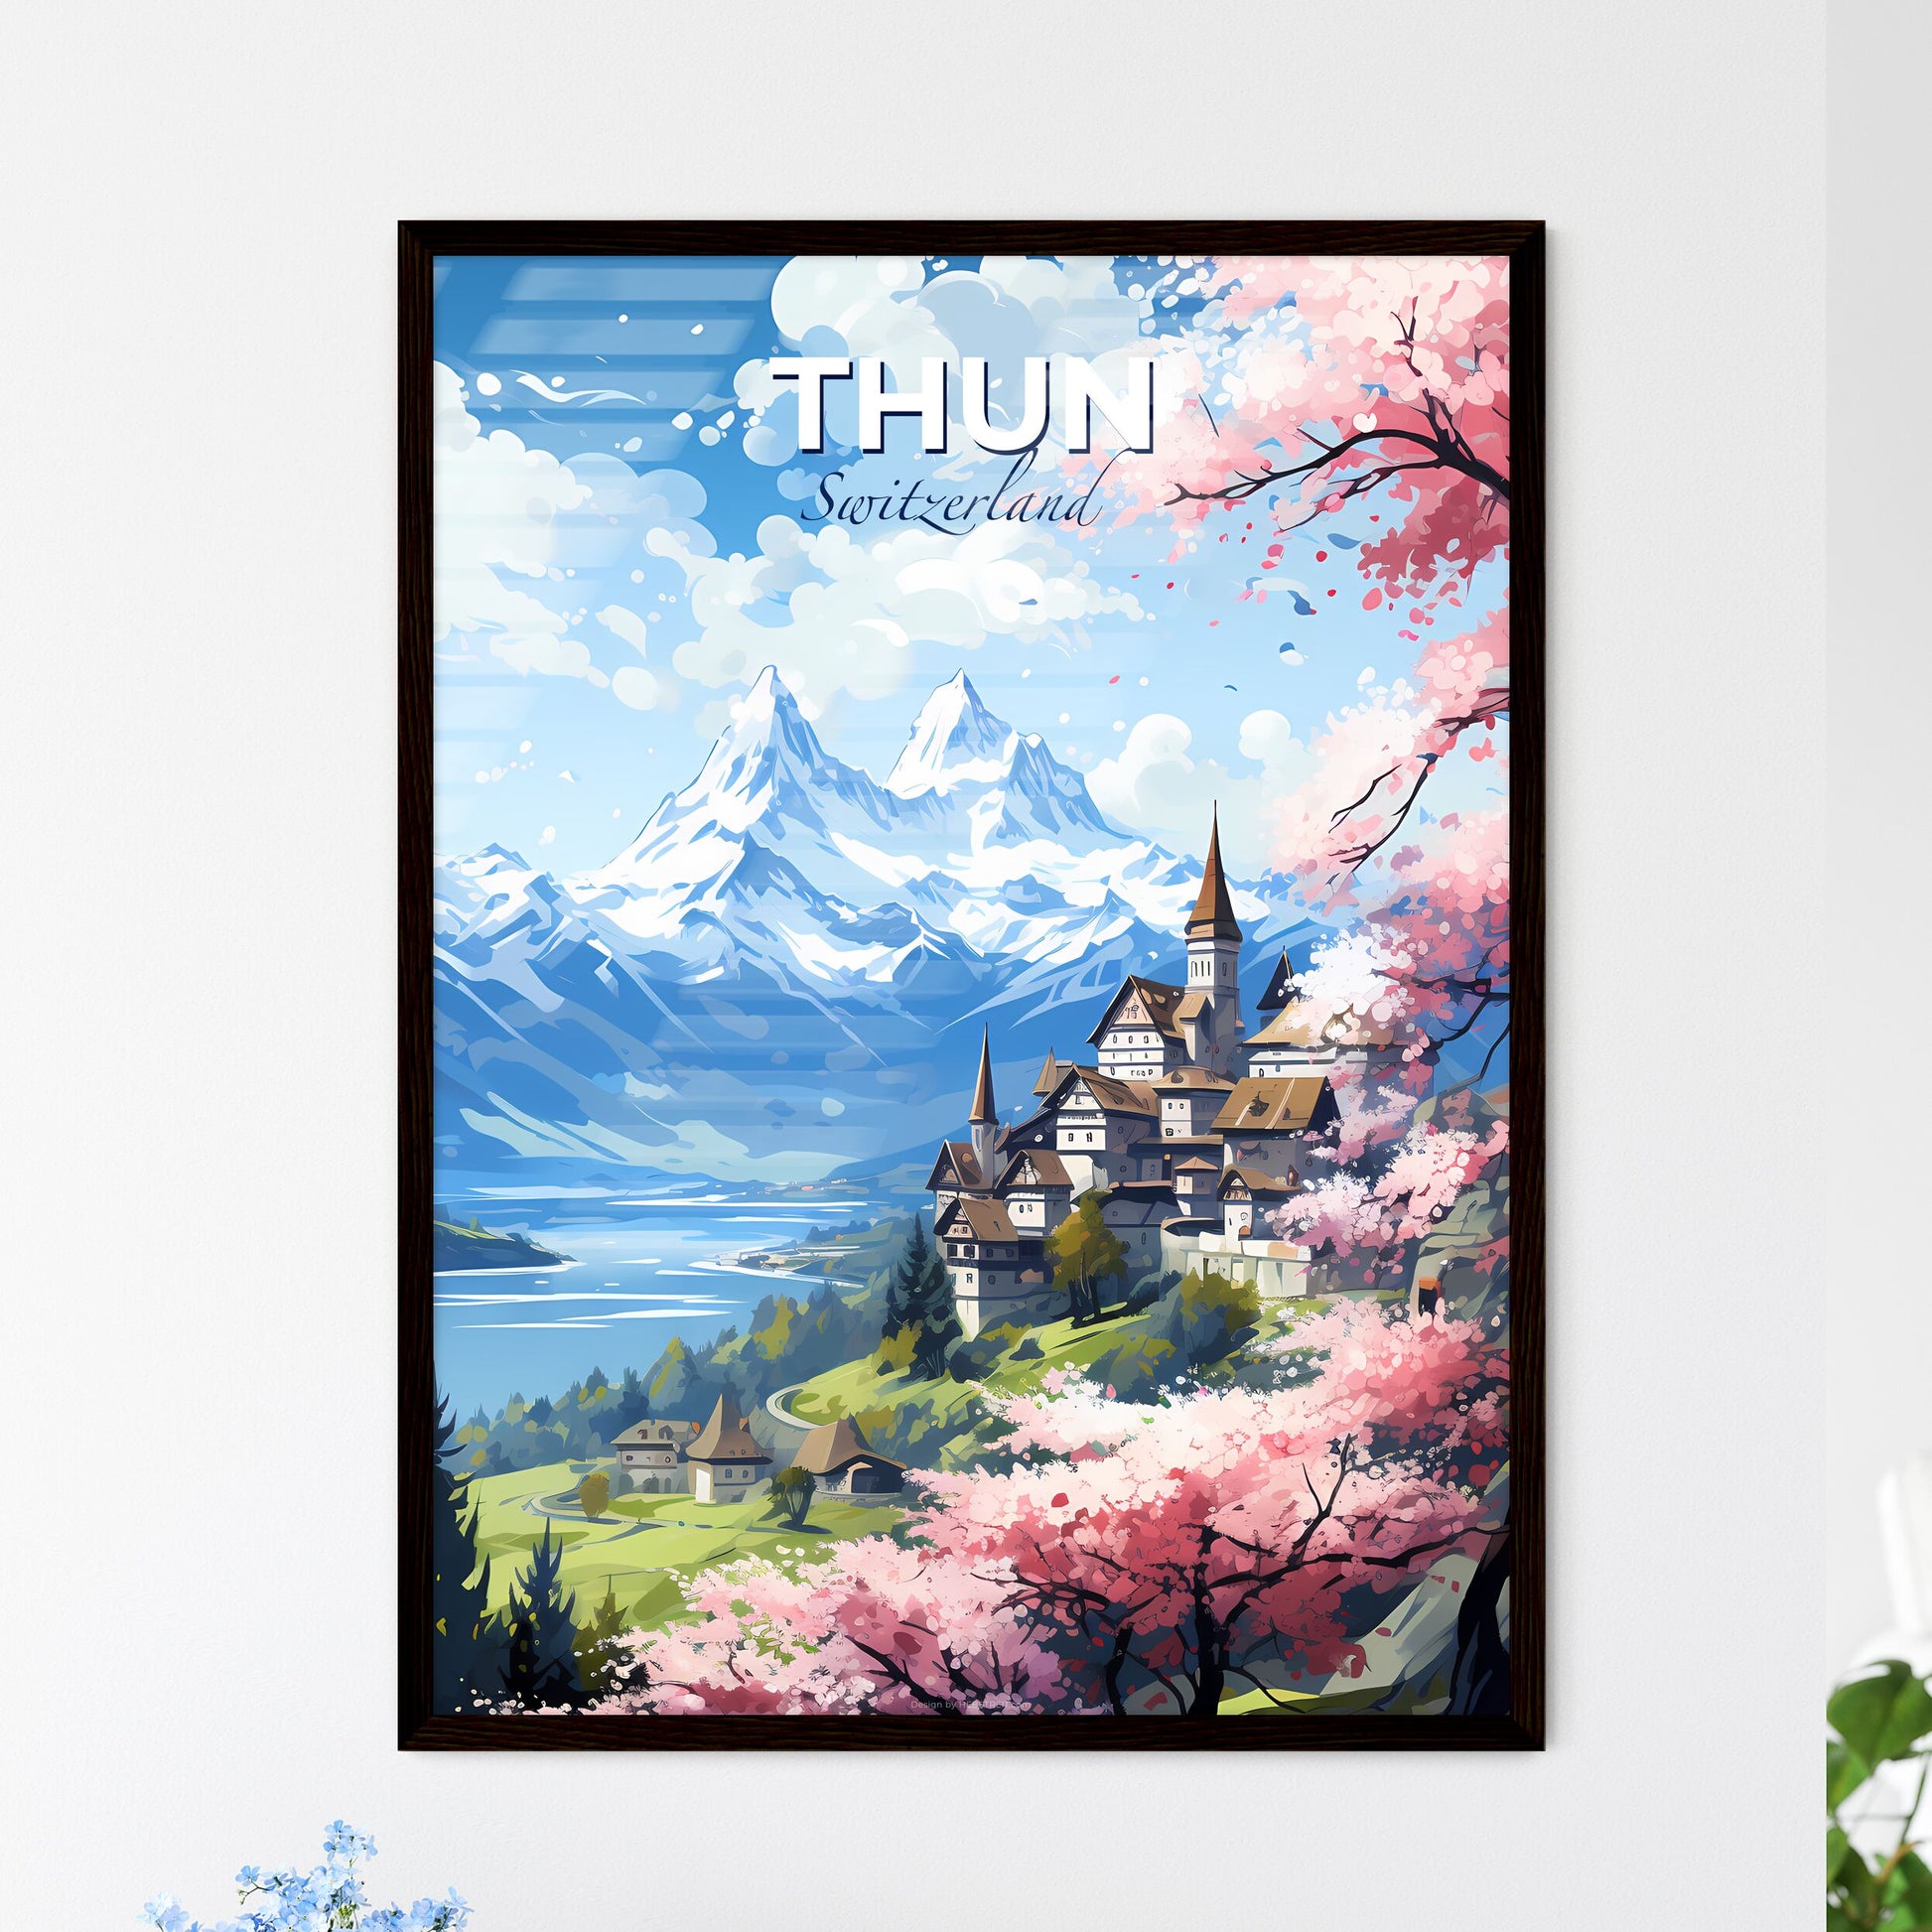 Thun Switzerland Skyline - A Landscape Of A Mountain And A Lake With A Town And Trees - Customizable Travel Gift Default Title